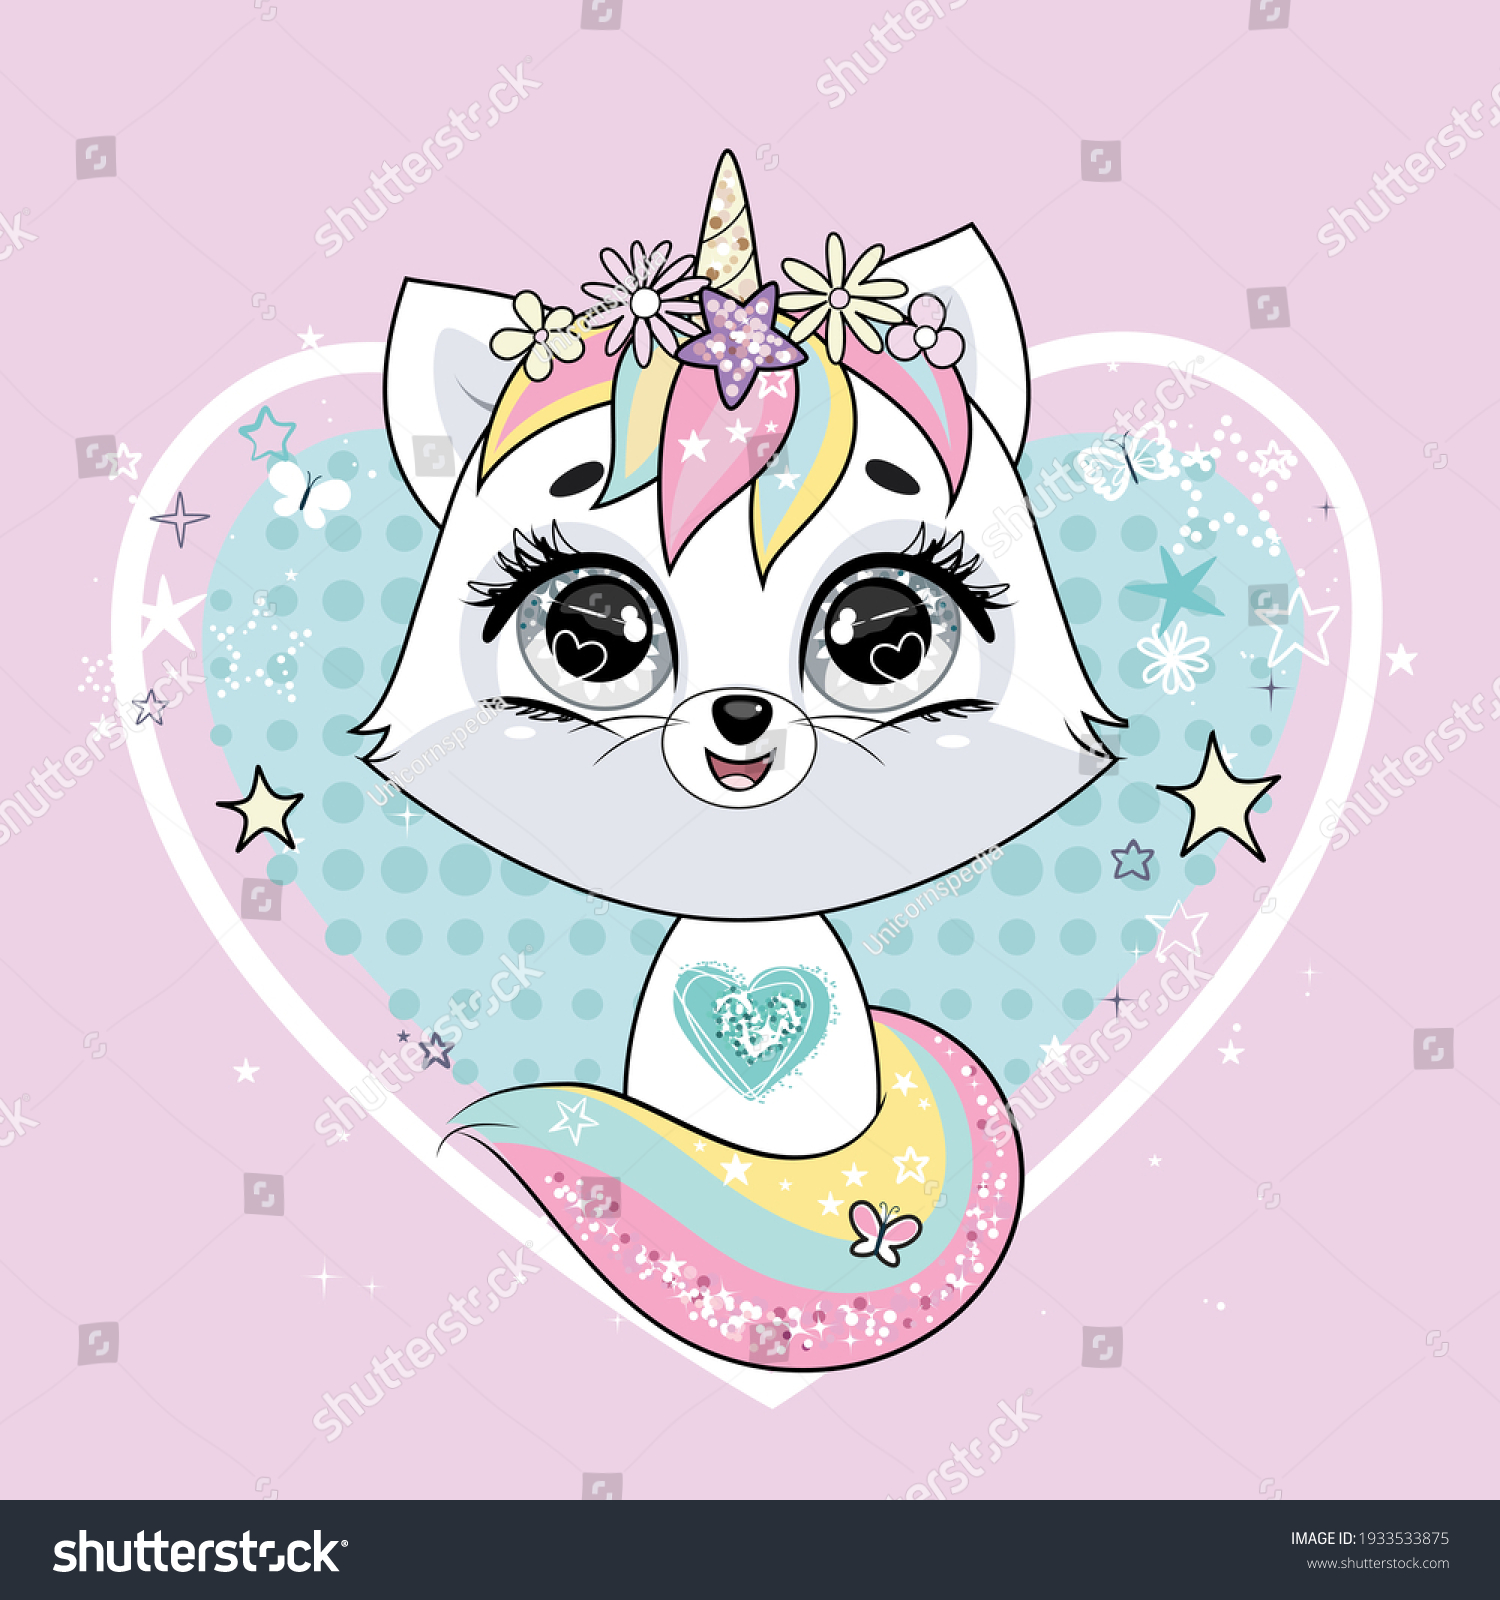 SVG of Cute little white cat unicorn or caticorn. Pastel soft colors. Vector illustration on pink background. svg